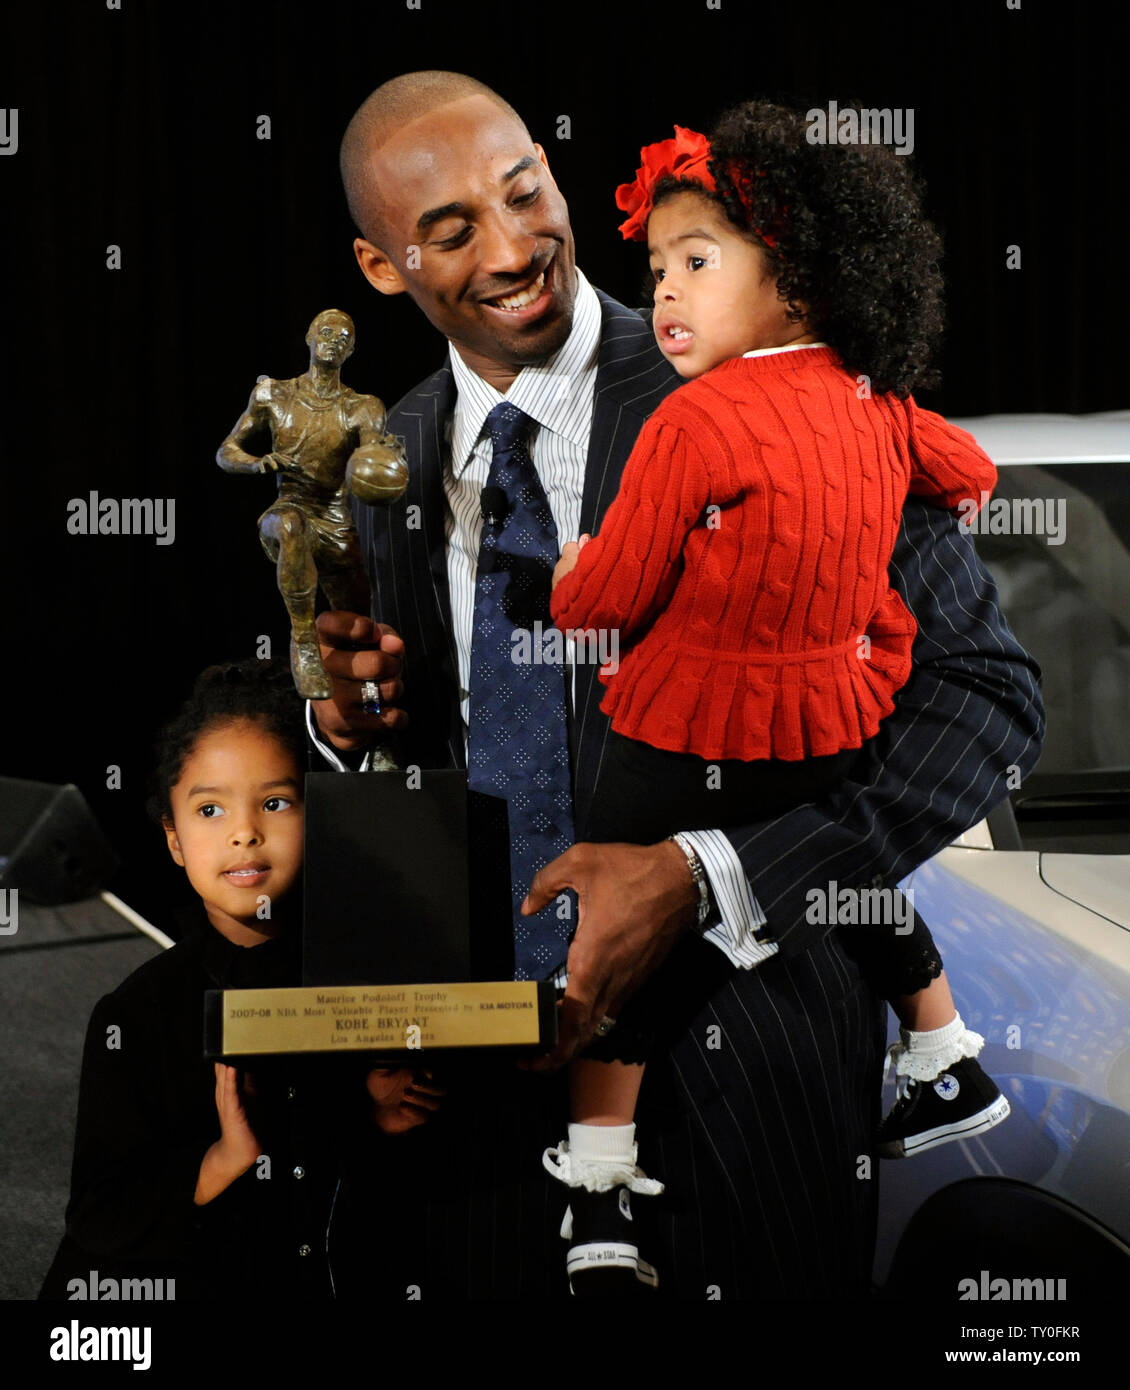 Portrait of Kobe Bryant's MVP trophy at the 2007-08 NBA Most Valuable